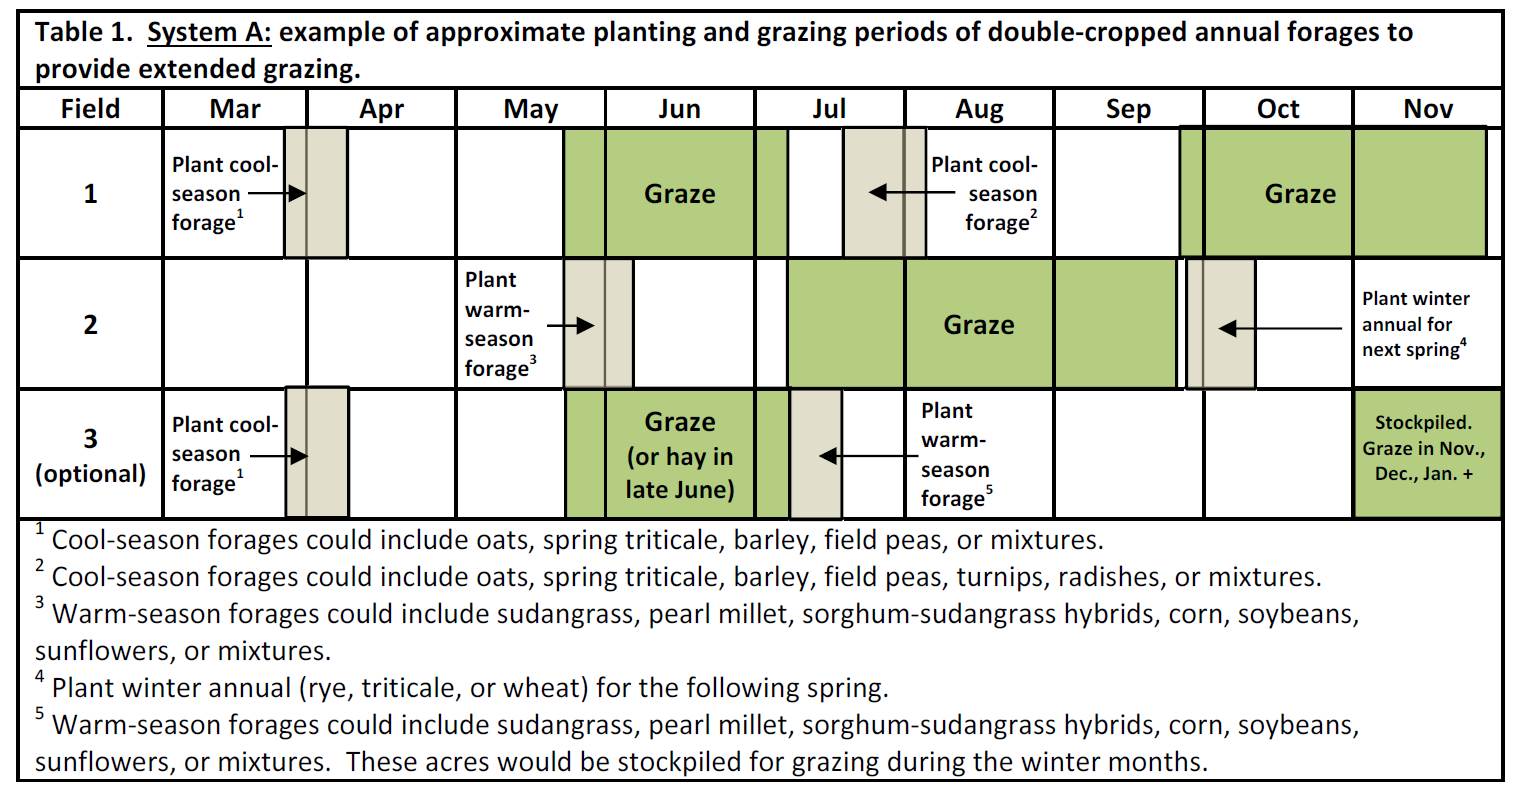 Table 1 showing a suggested timeline for planting of cool- and warm-season annual forages